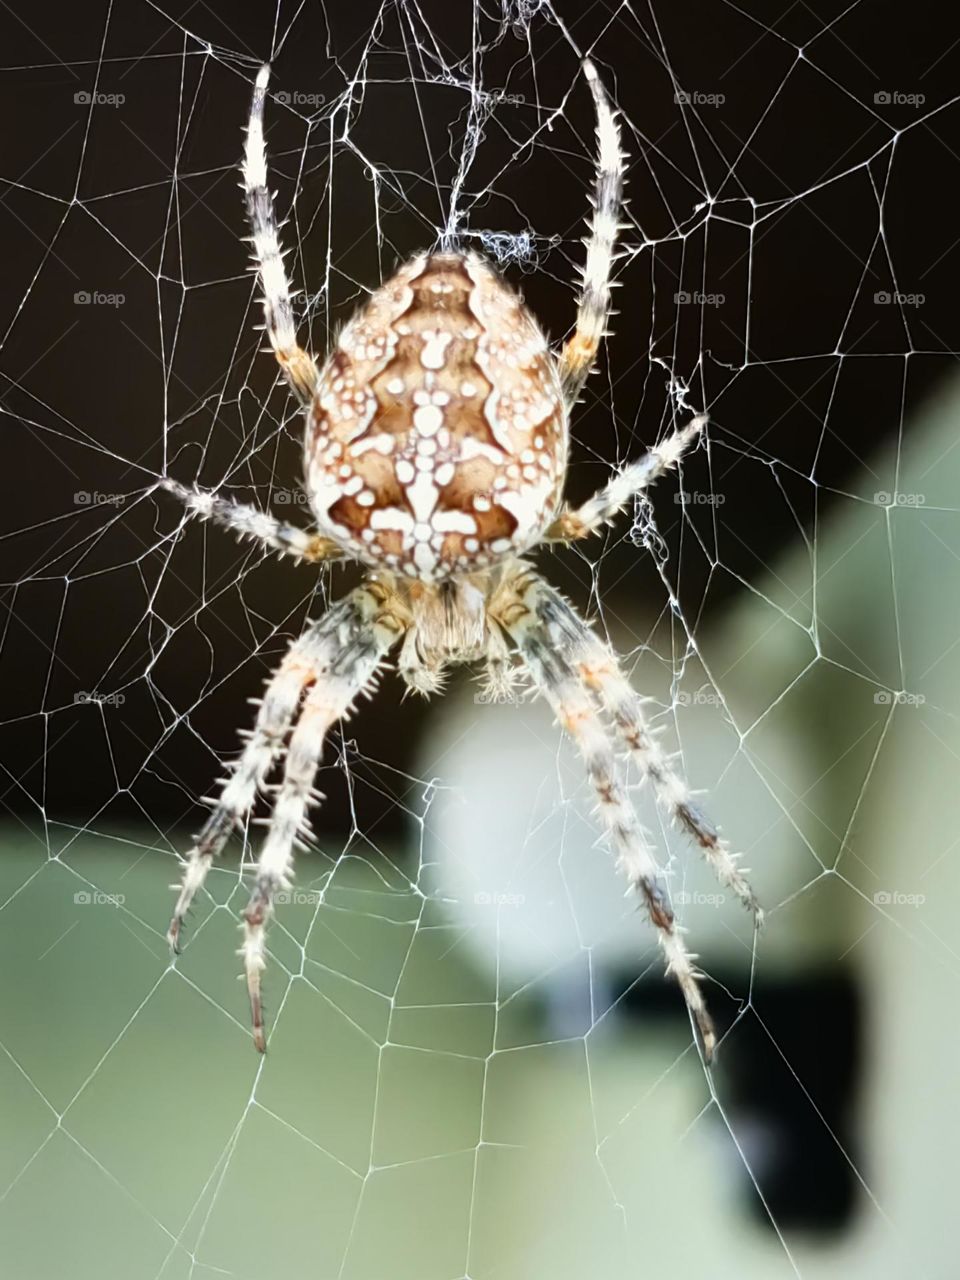 Spider in her Web